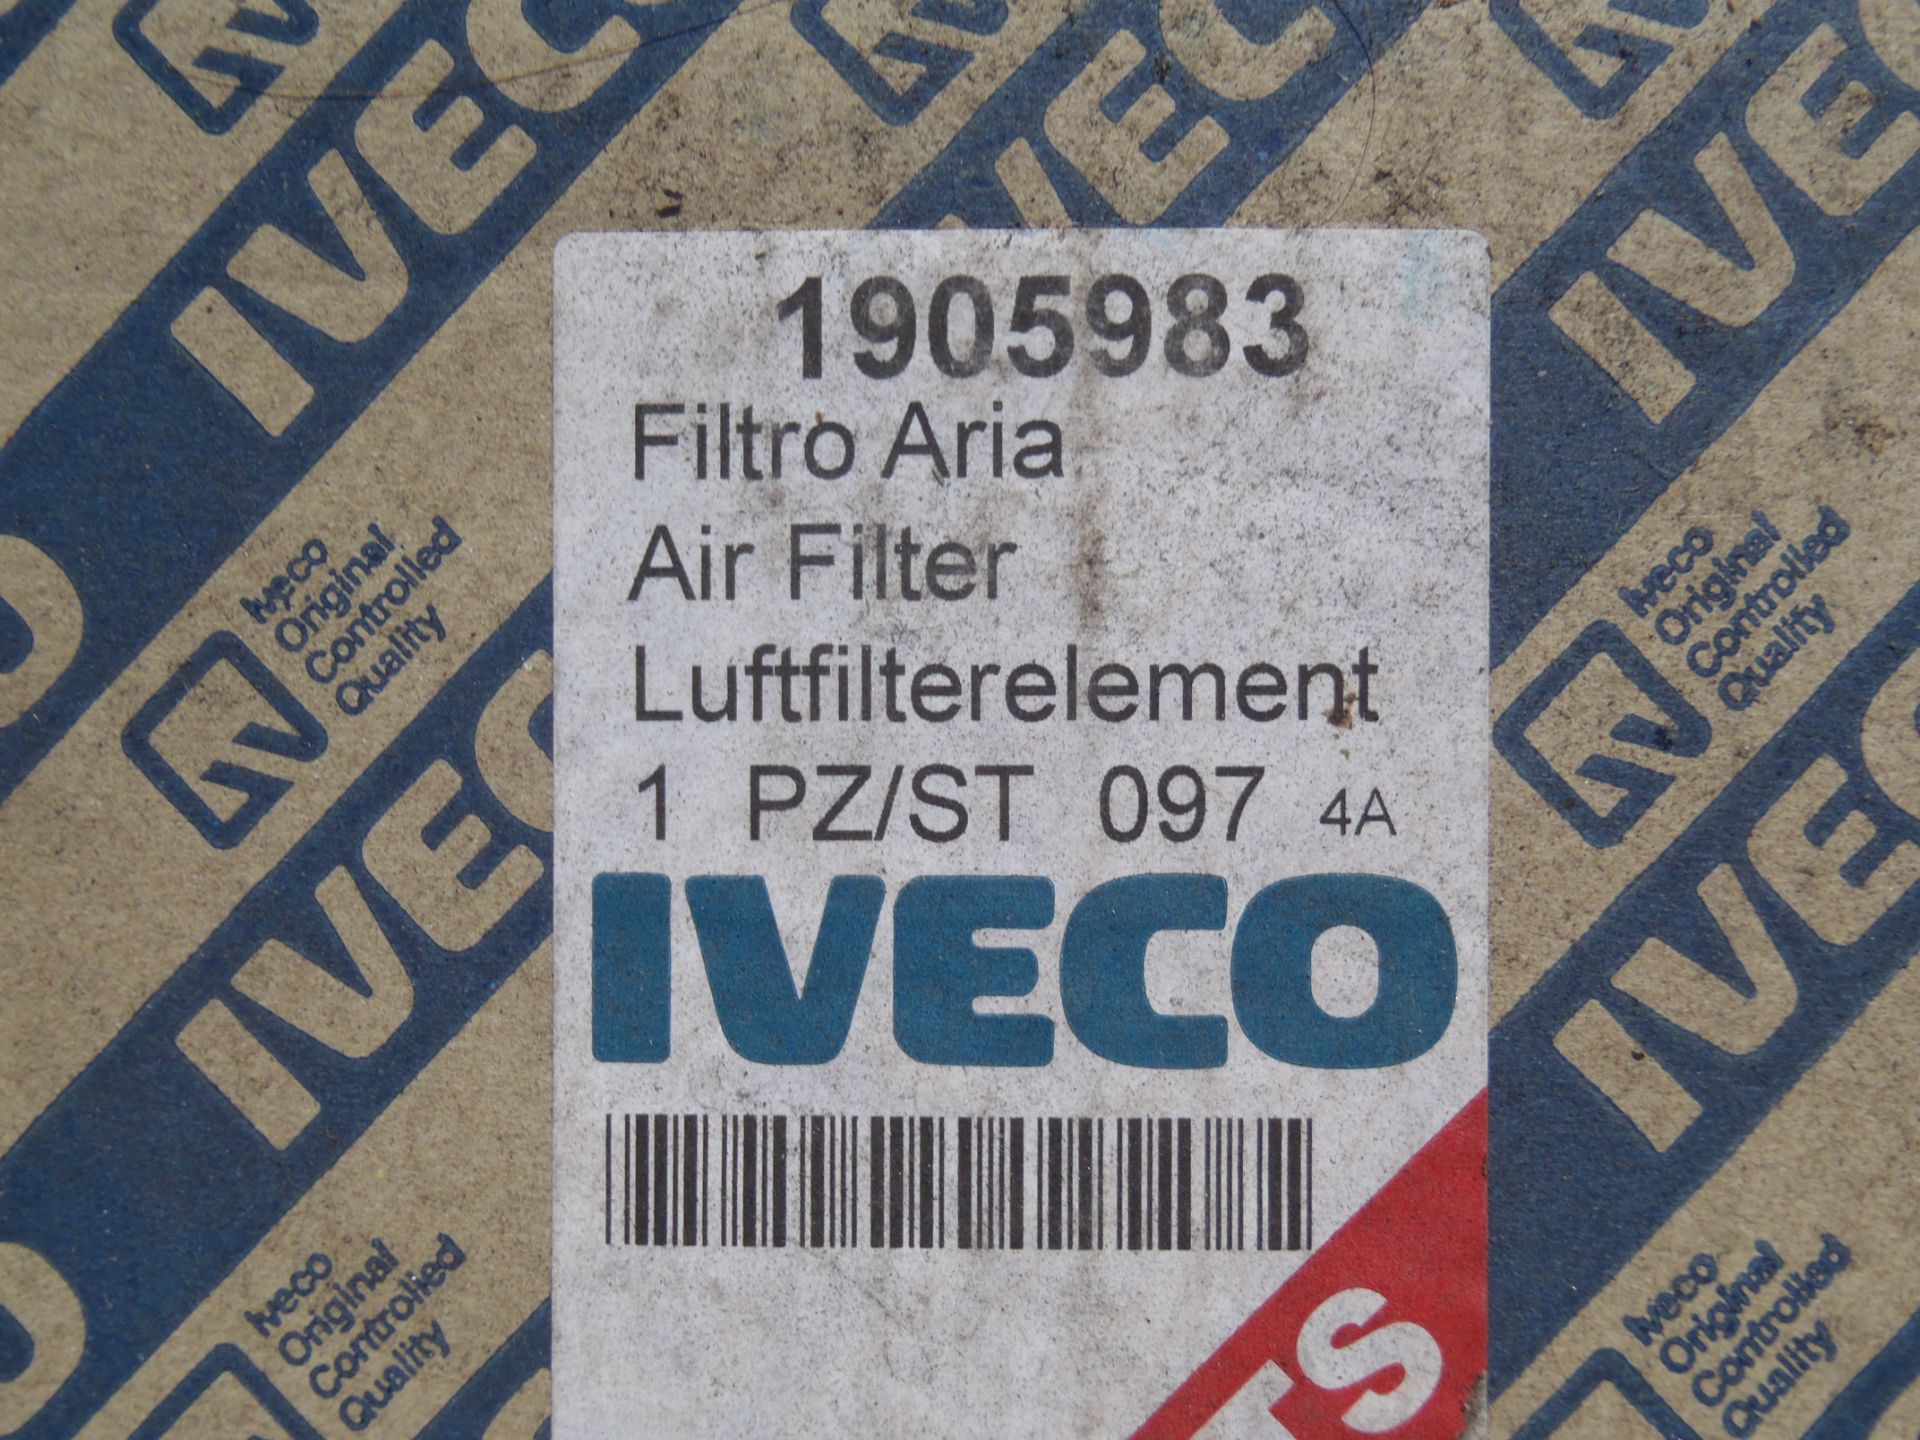 Pallet of Iveco Spares - Completely UNTESTED - Used Condition - Image 4 of 6